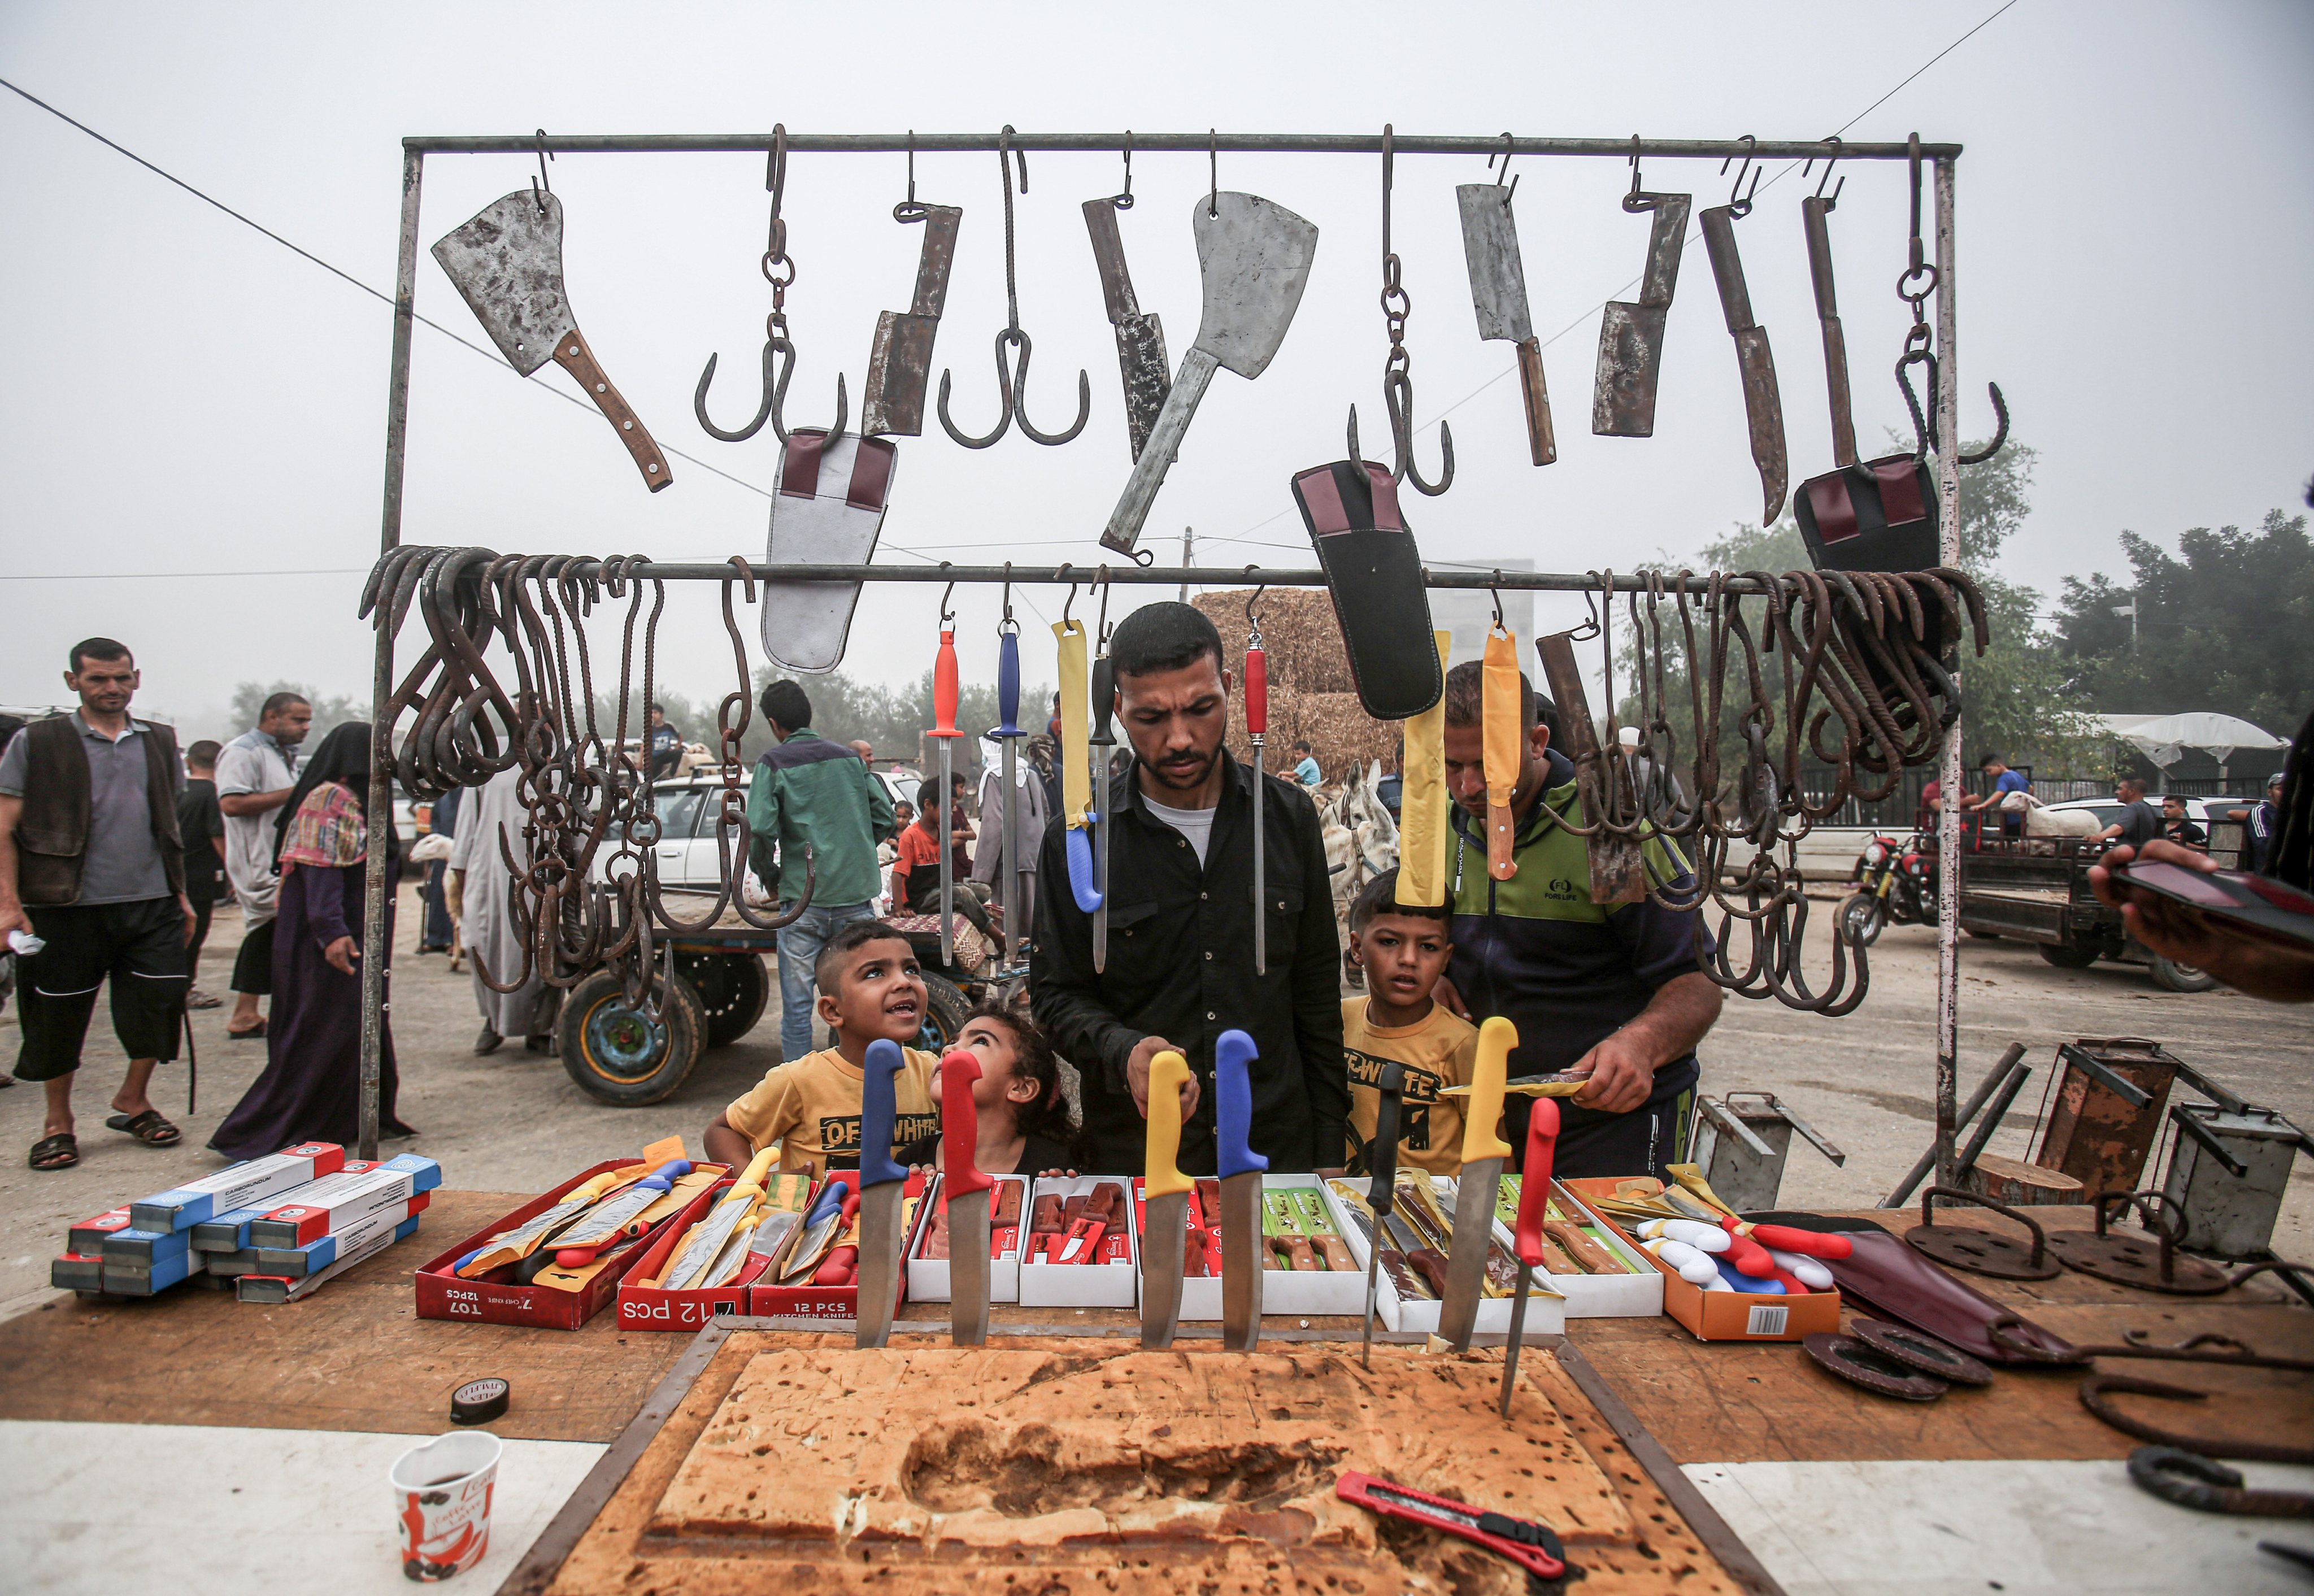 Palestinians buy sharp cutting pieces sold by a vendor at